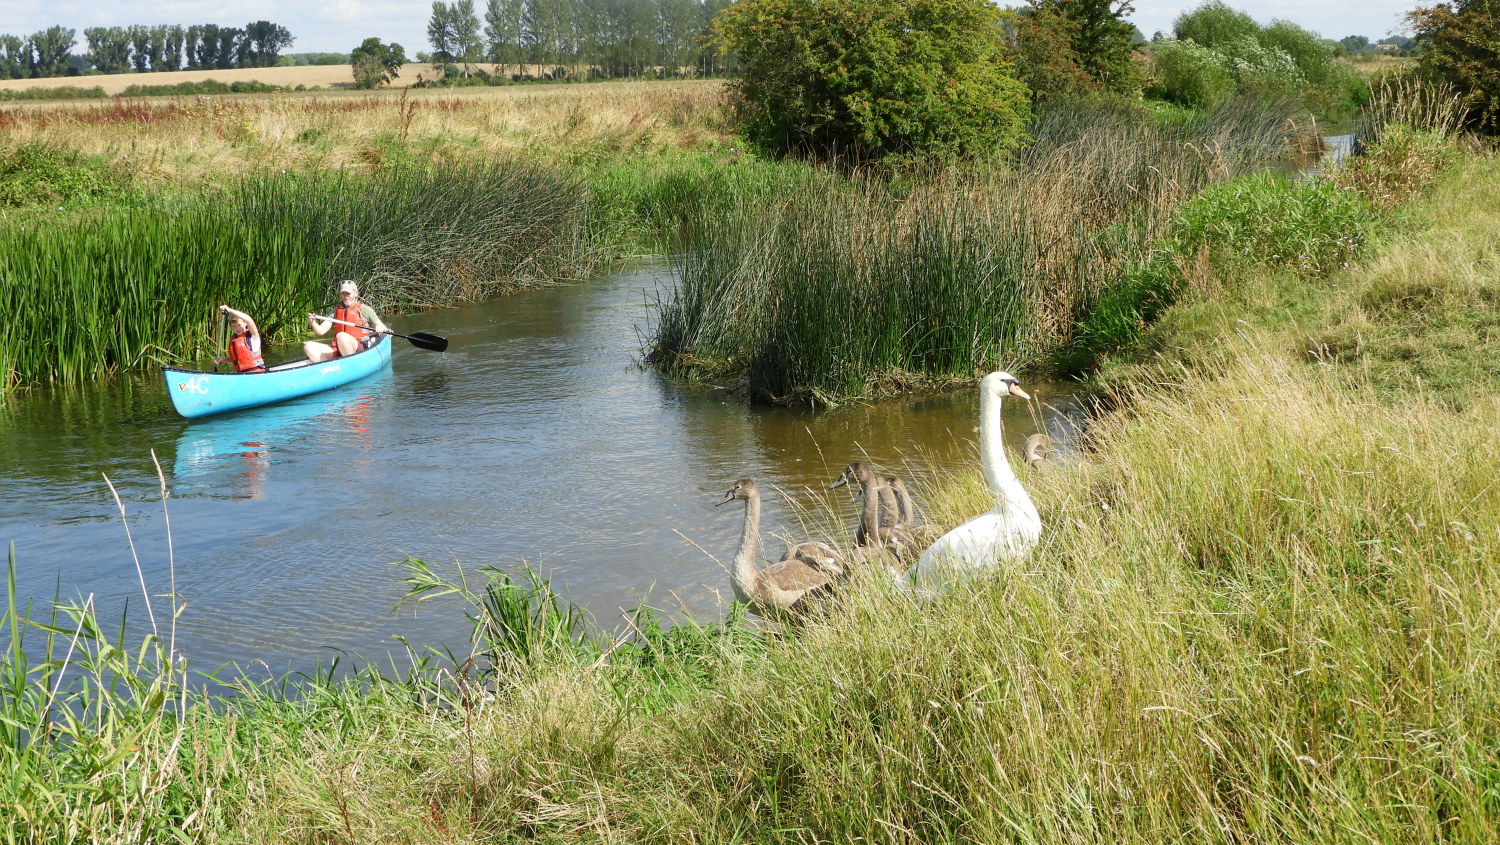 Pleasure boaters and Cantankerous Swans